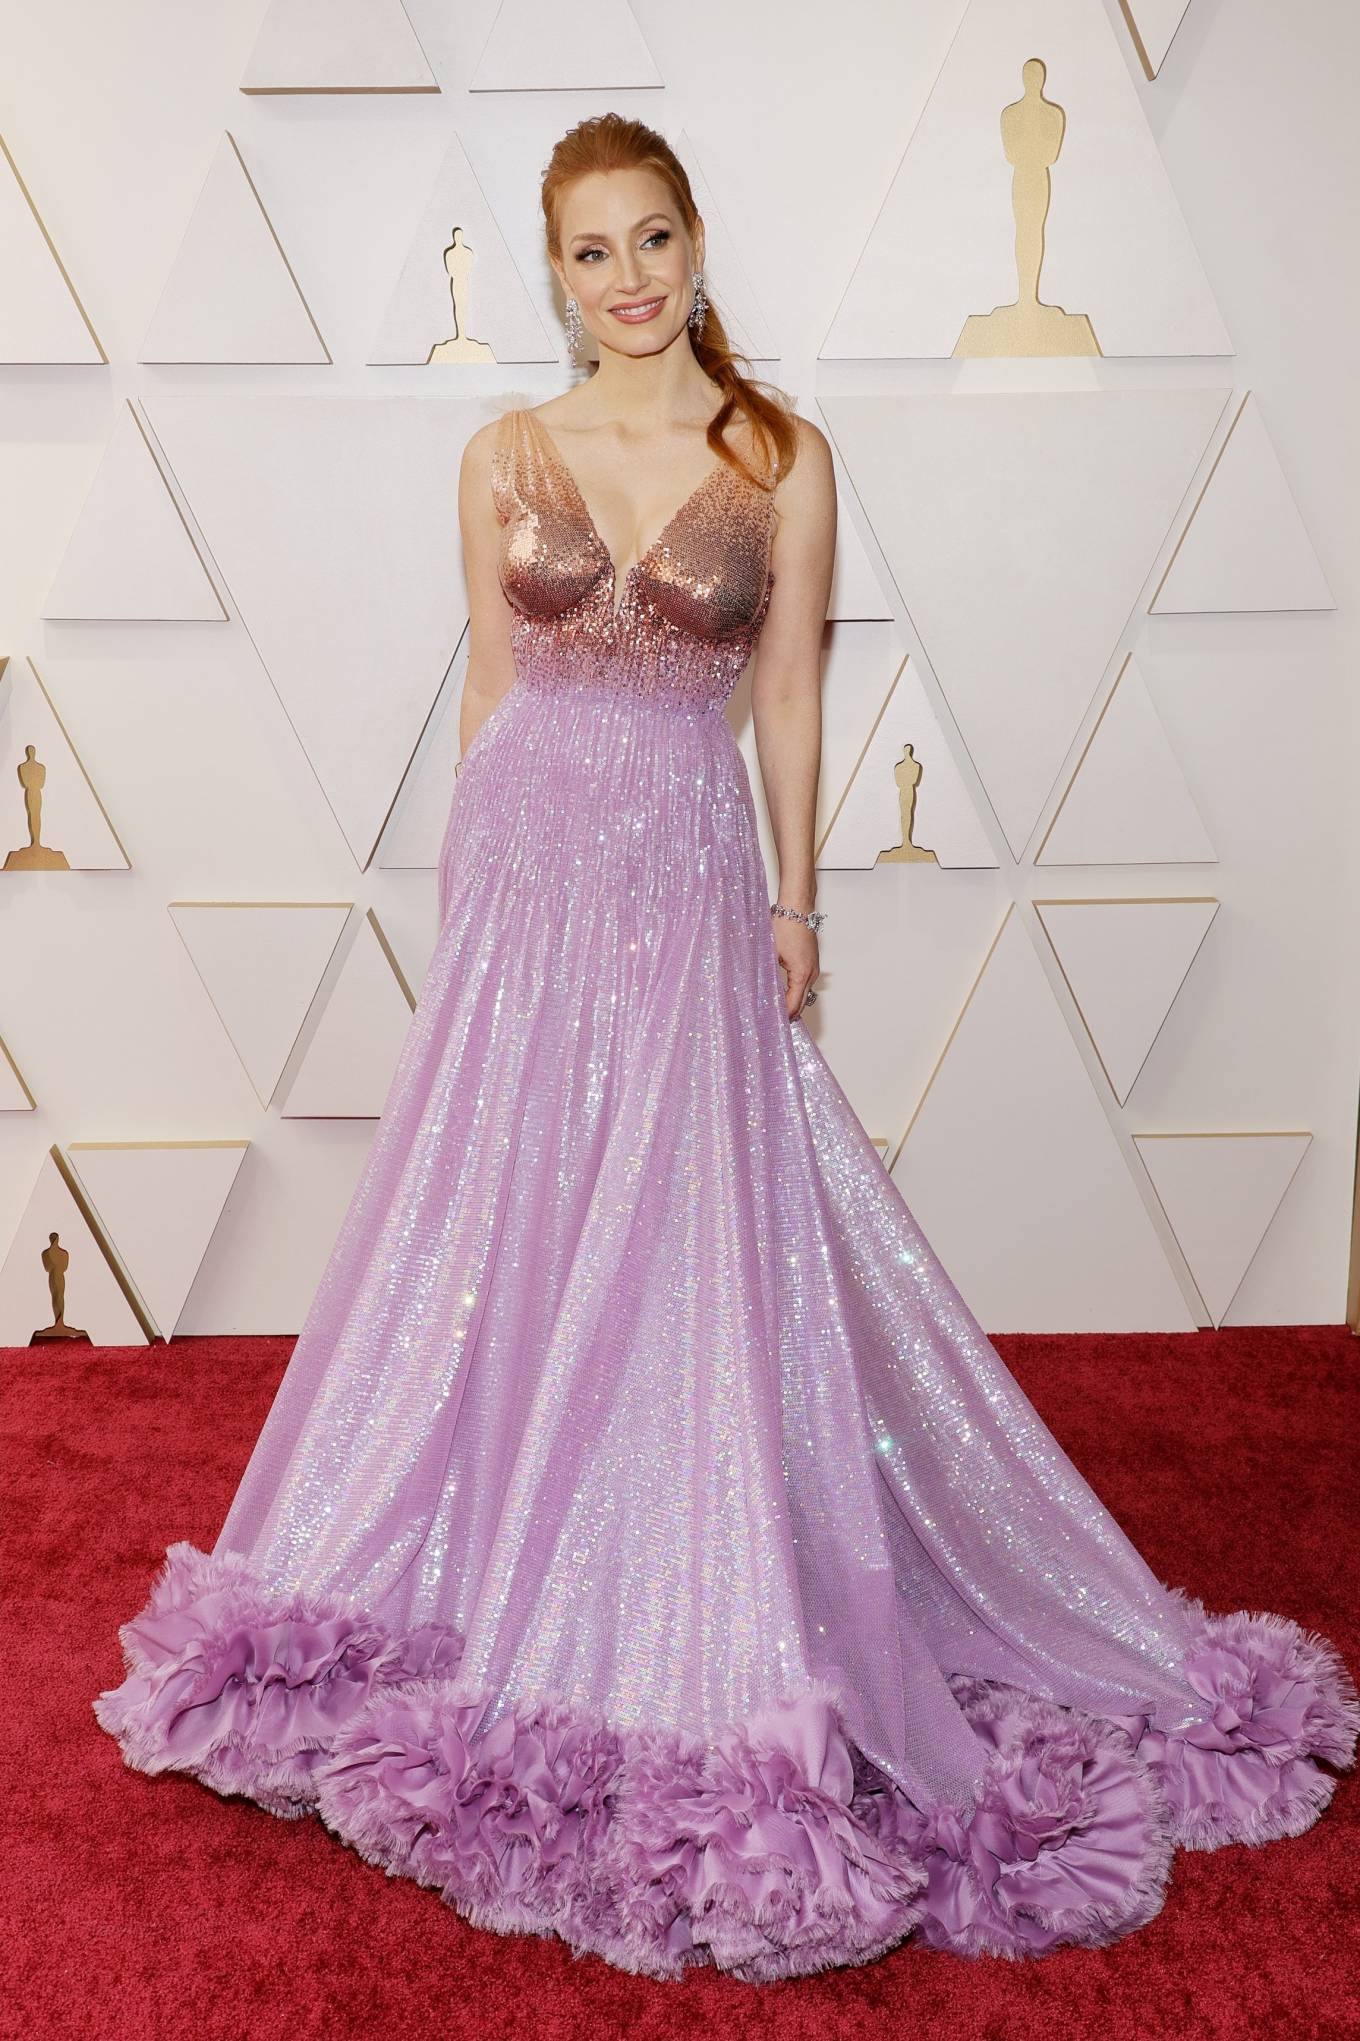 Jessica Chastain 2022 : Jessica Chastain – 2022 Academy Awards at the Dolby Theatre in Los Angeles-04